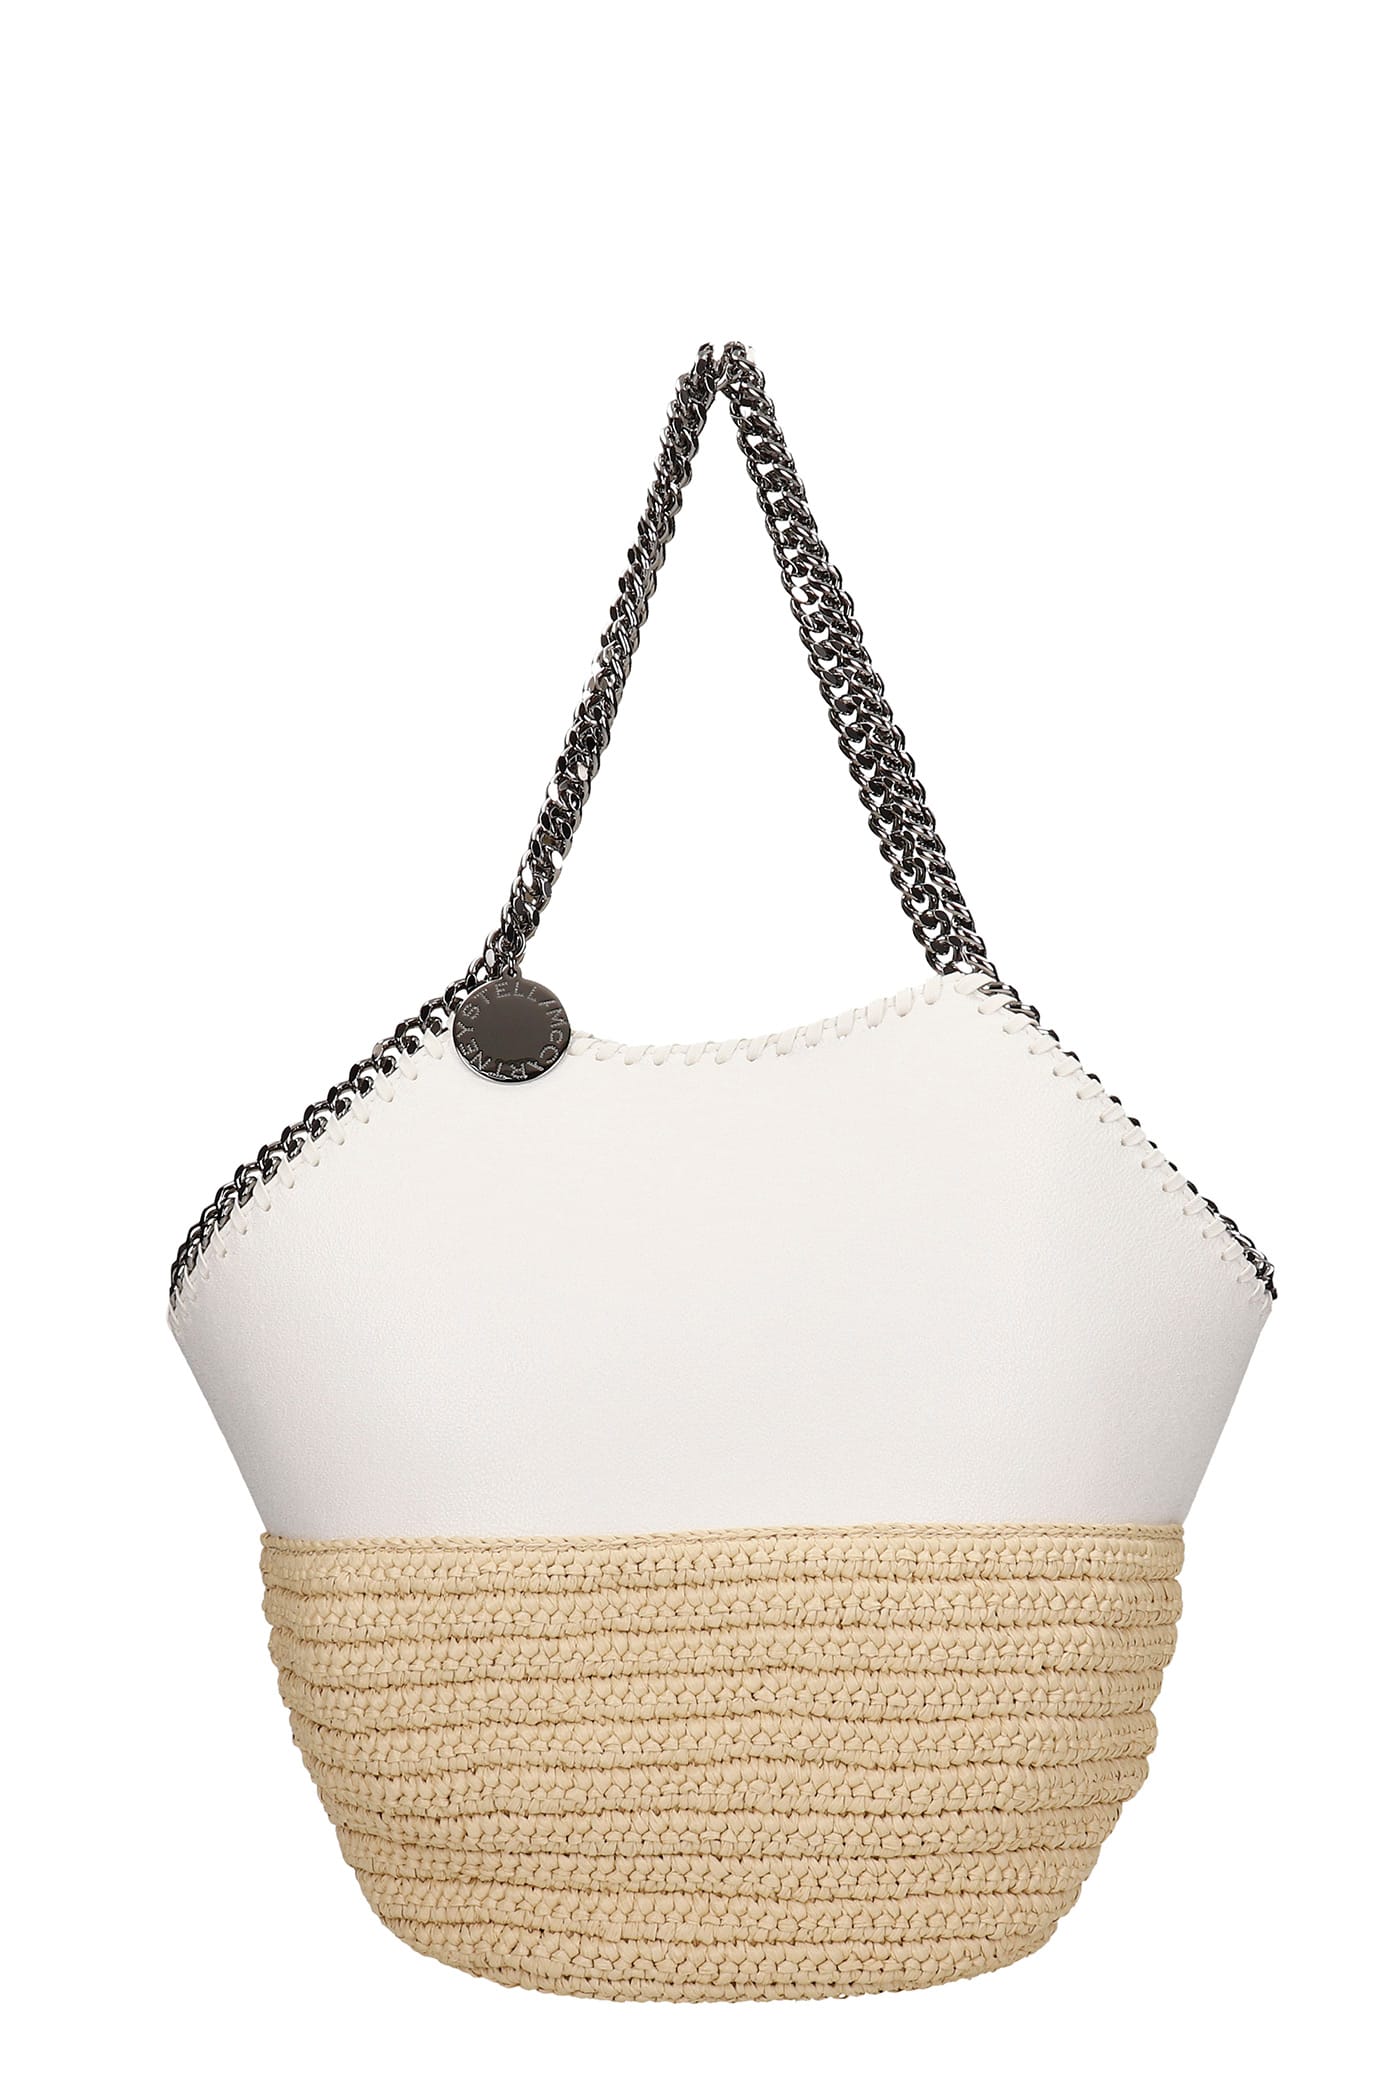 Stella McCartney Tote In White Faux Leather